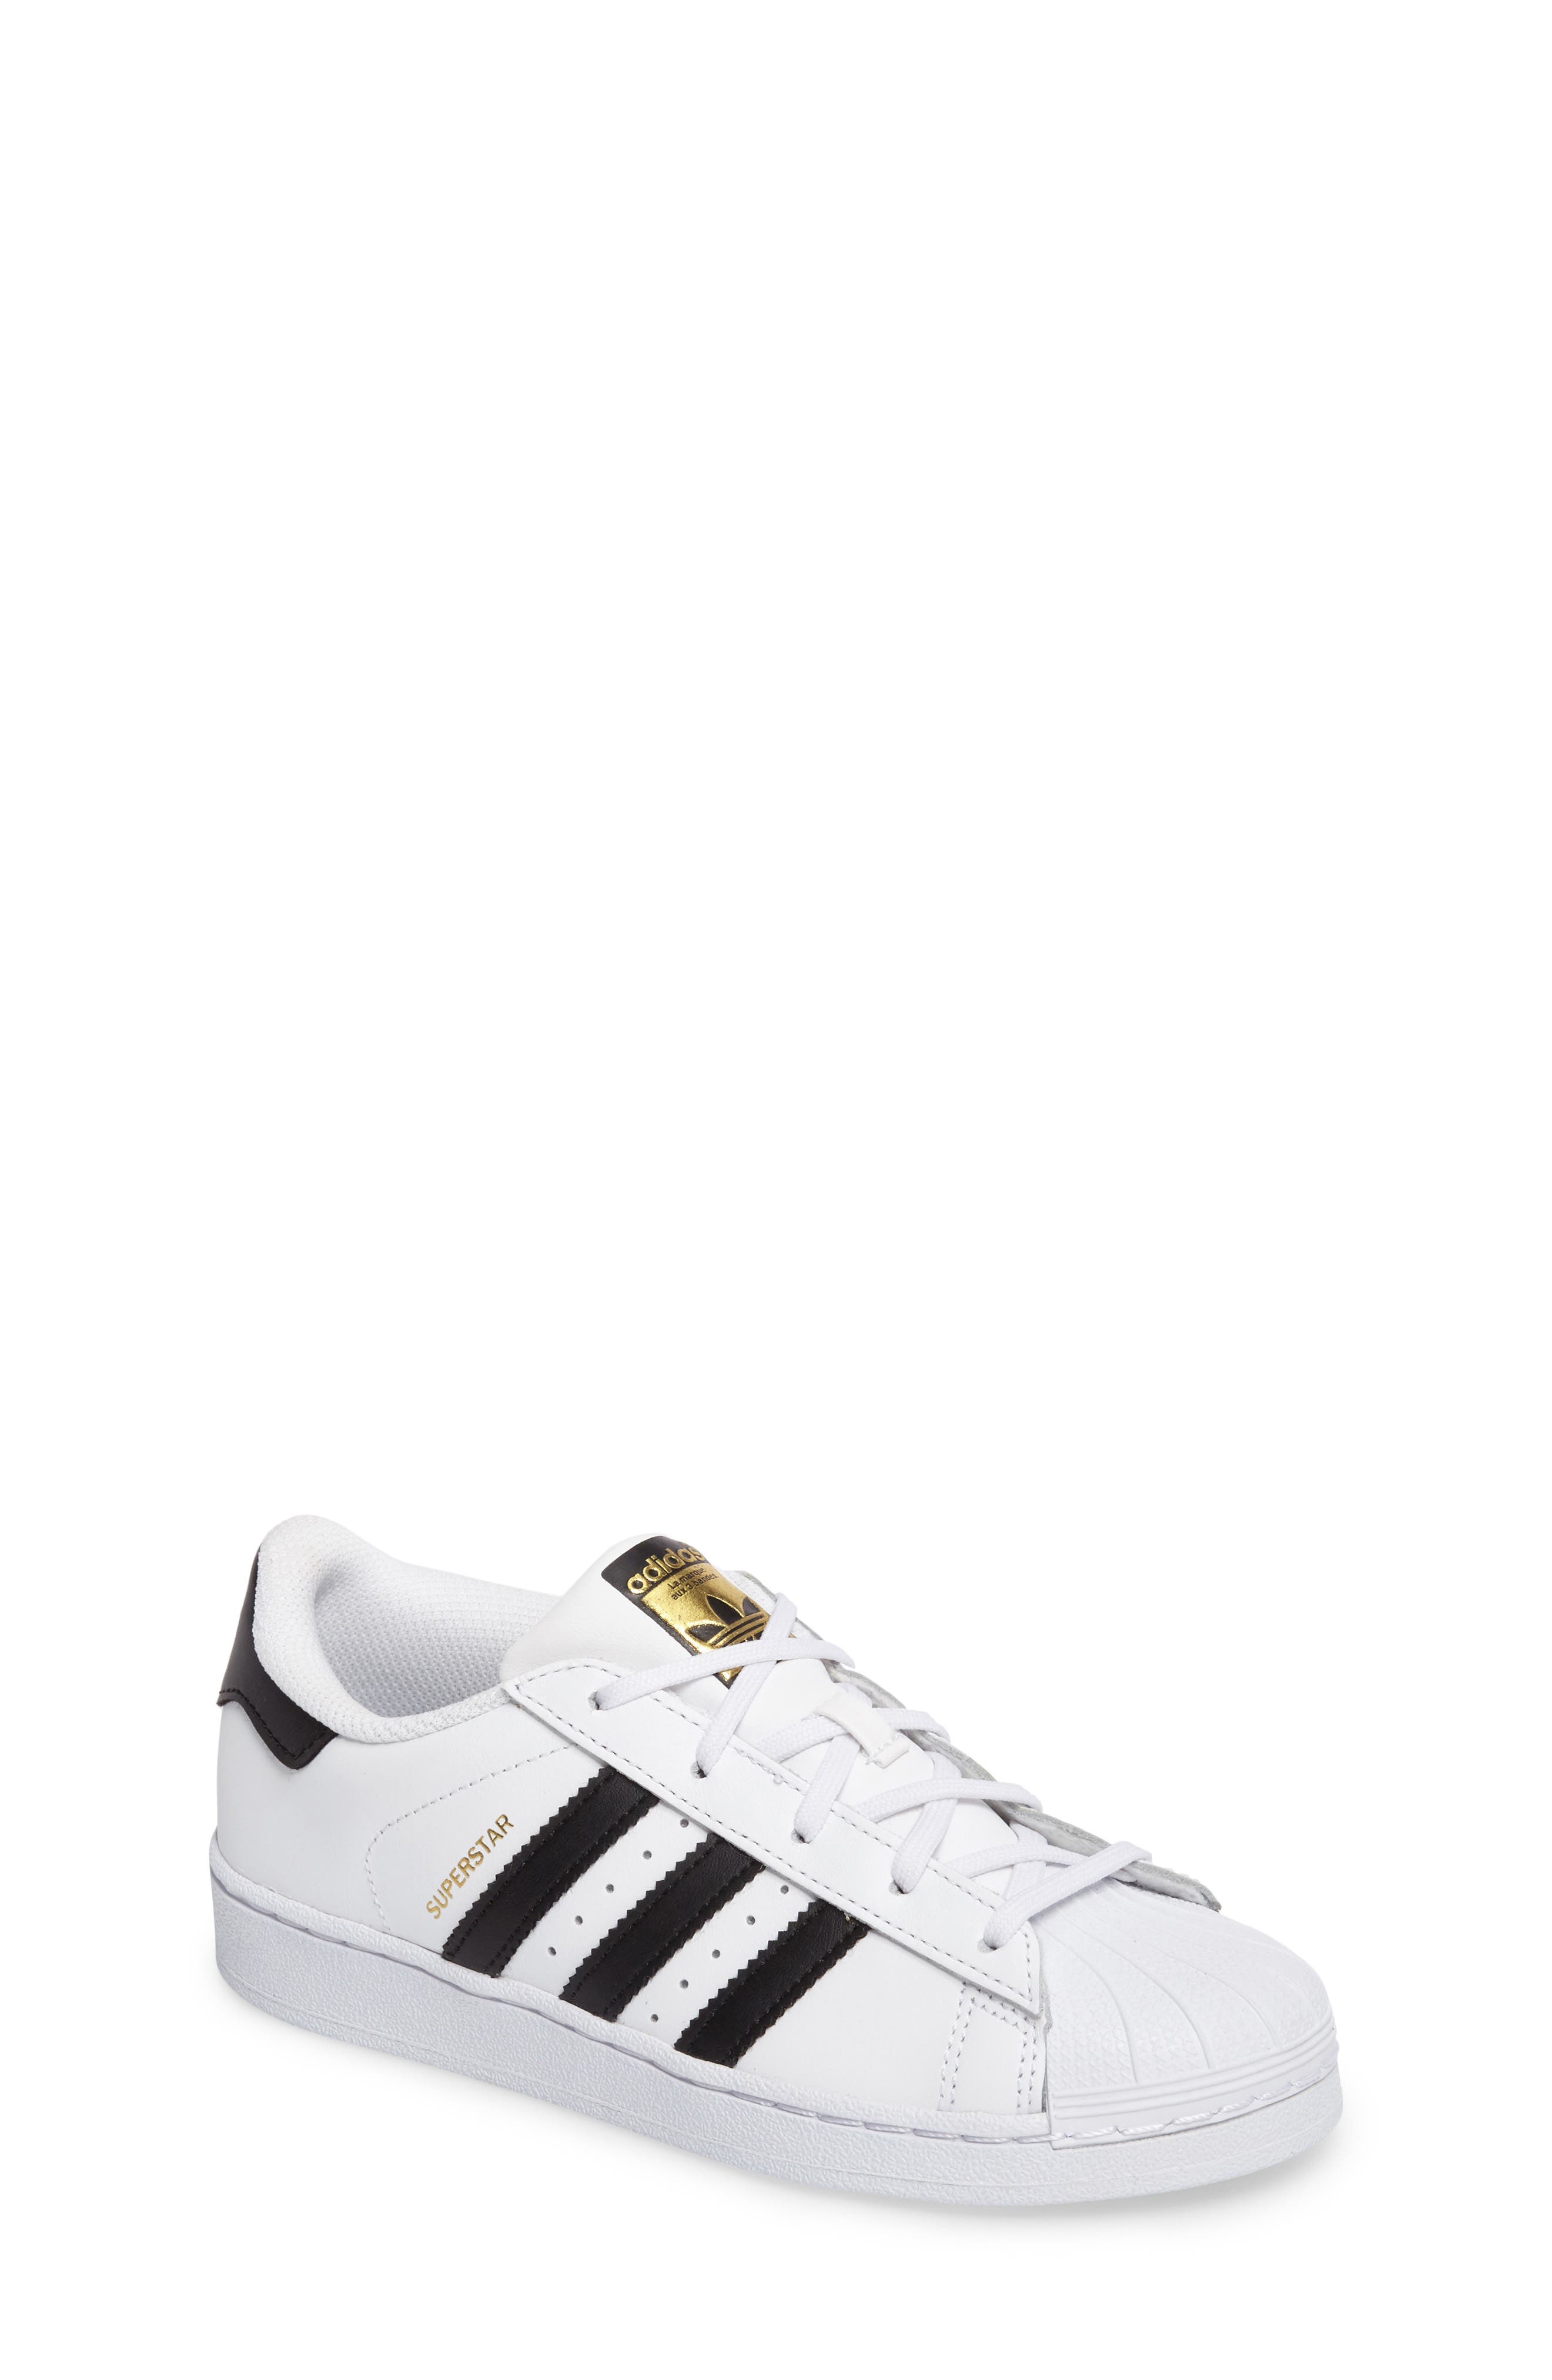 baby girl adidas trainers Off 67% - mlsm.in